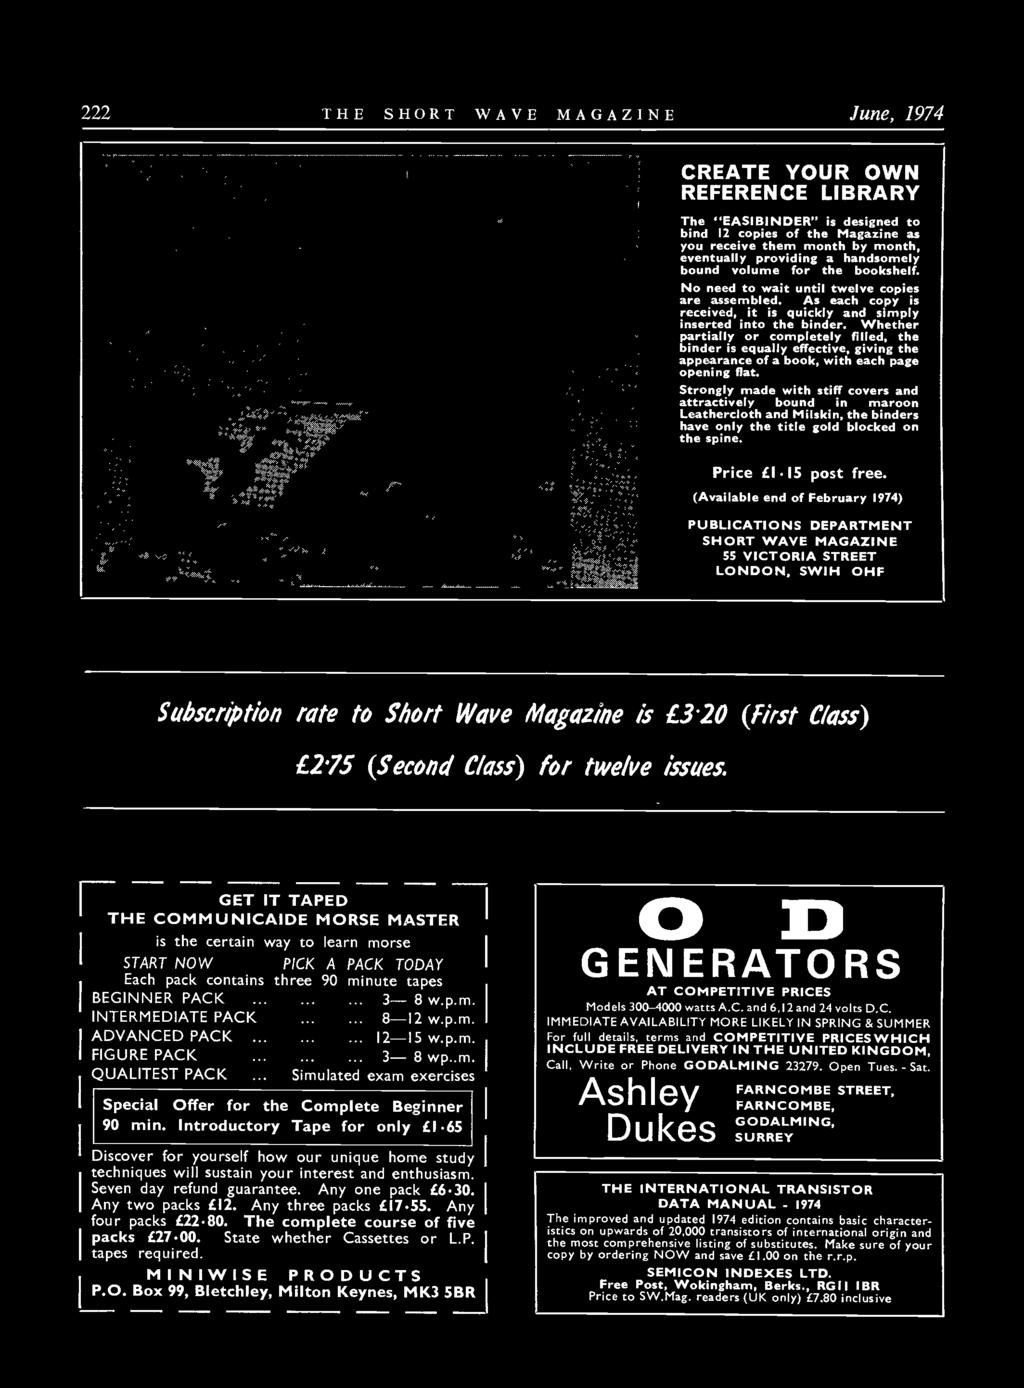 (Available end of February 1974) PUBLICATIONS DEPARTMENT SHORT WAVE MAGAZINE SS VICTORIA STREET LONDON, SWIH OHF Subscription rate to Short Wave Magazine is 3.